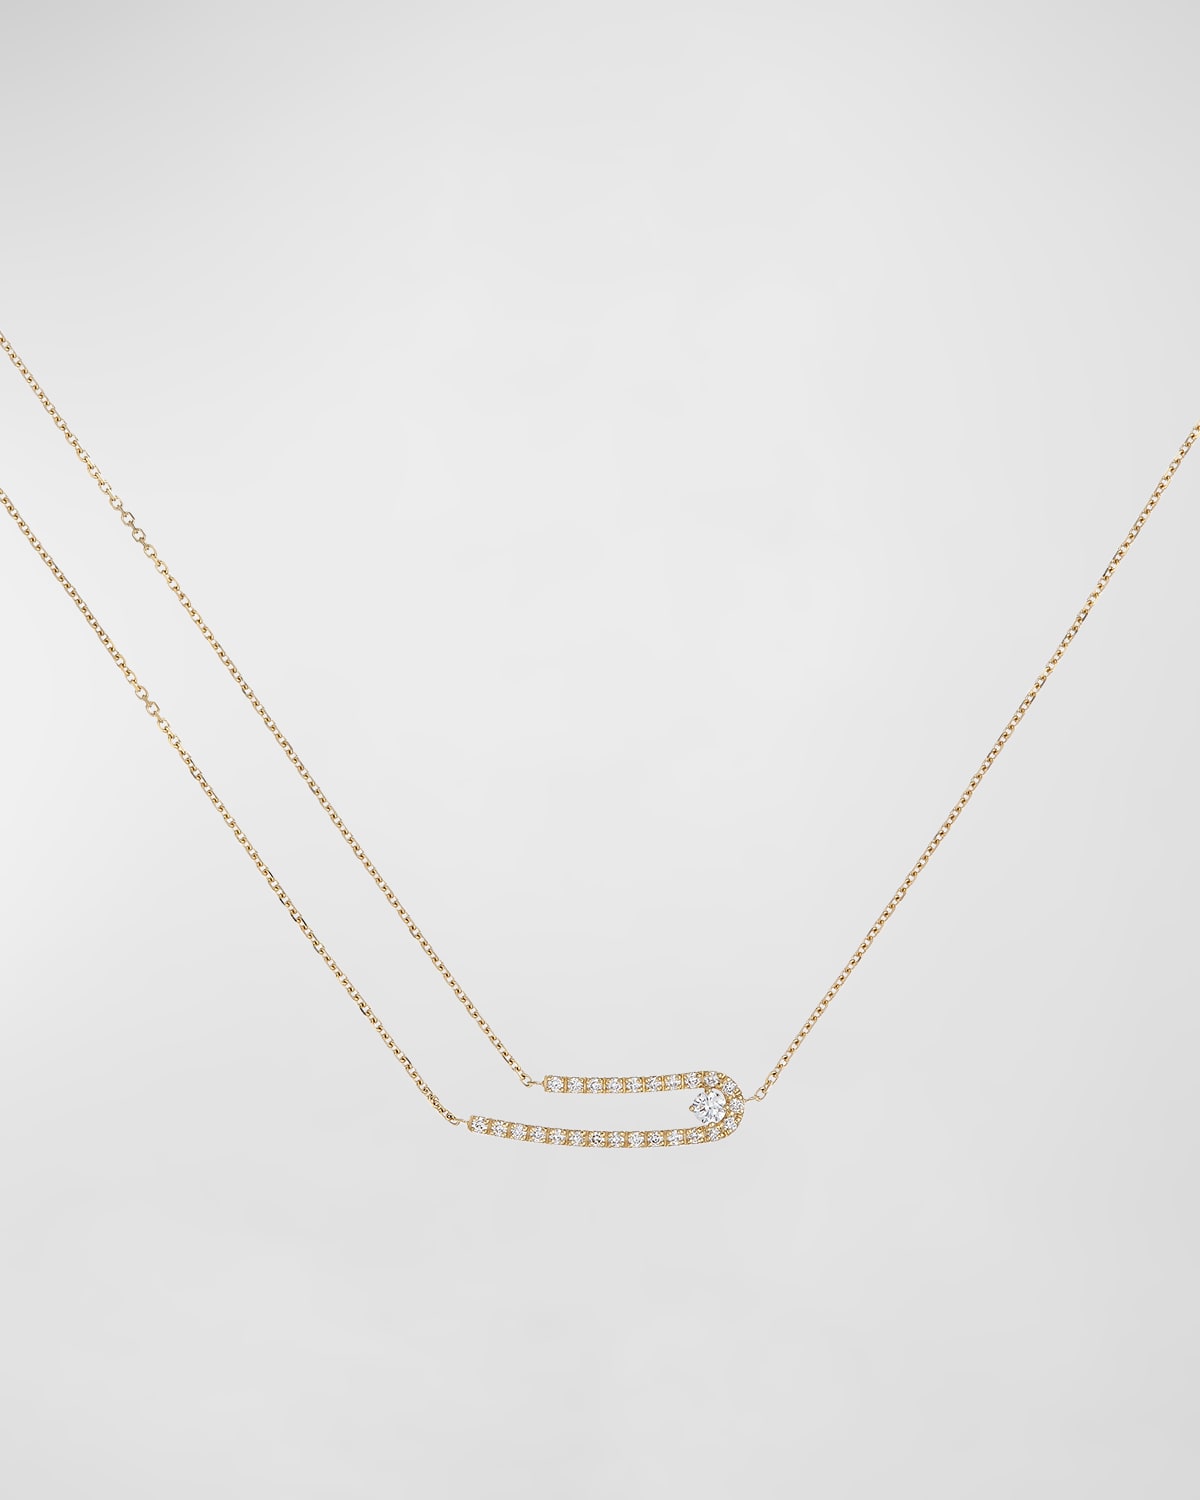 18K Yellow Gold Multi Chain Necklace with Diamonds